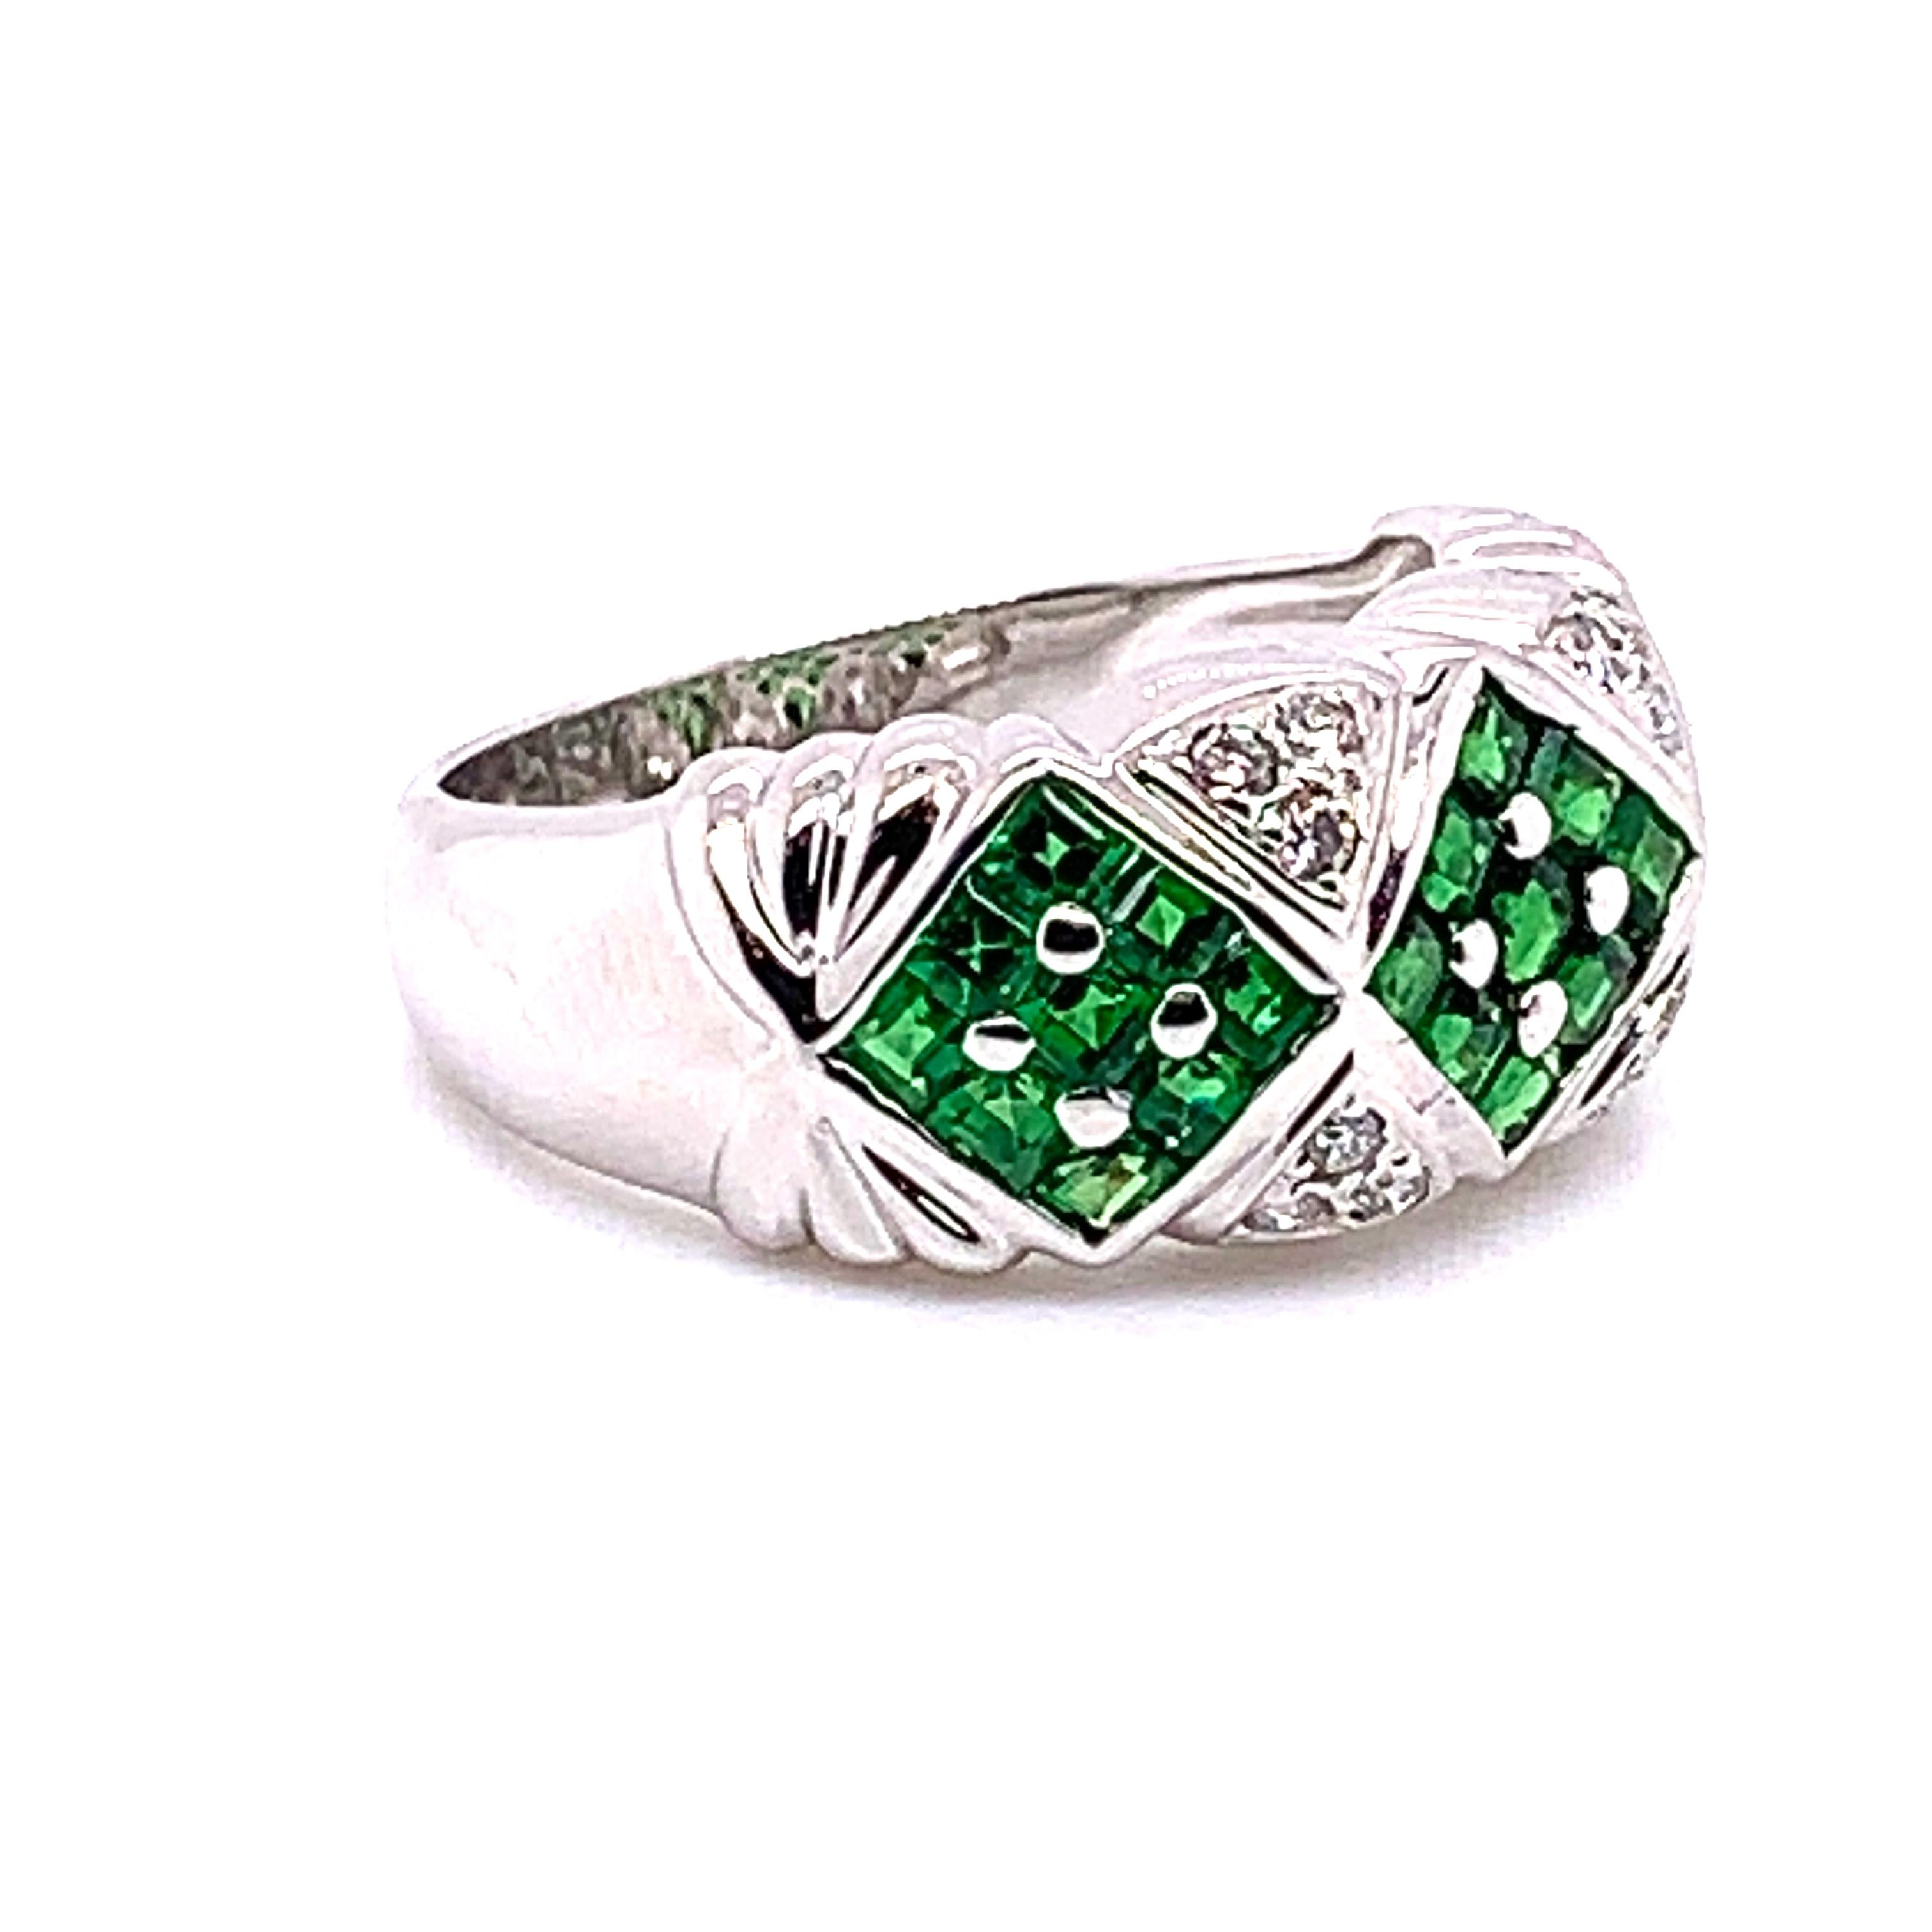 Feast your eyes on this Elegant 2 Carat Fashion verdant green Tsavorite and Diamond Ring made by Shimon's Creations. This Magnificent Ring in 18 Karat white gold features 0.16 Carat White Diamonds 1.84 Carat Green Tsavorite.  

Color Stone, Diamond,